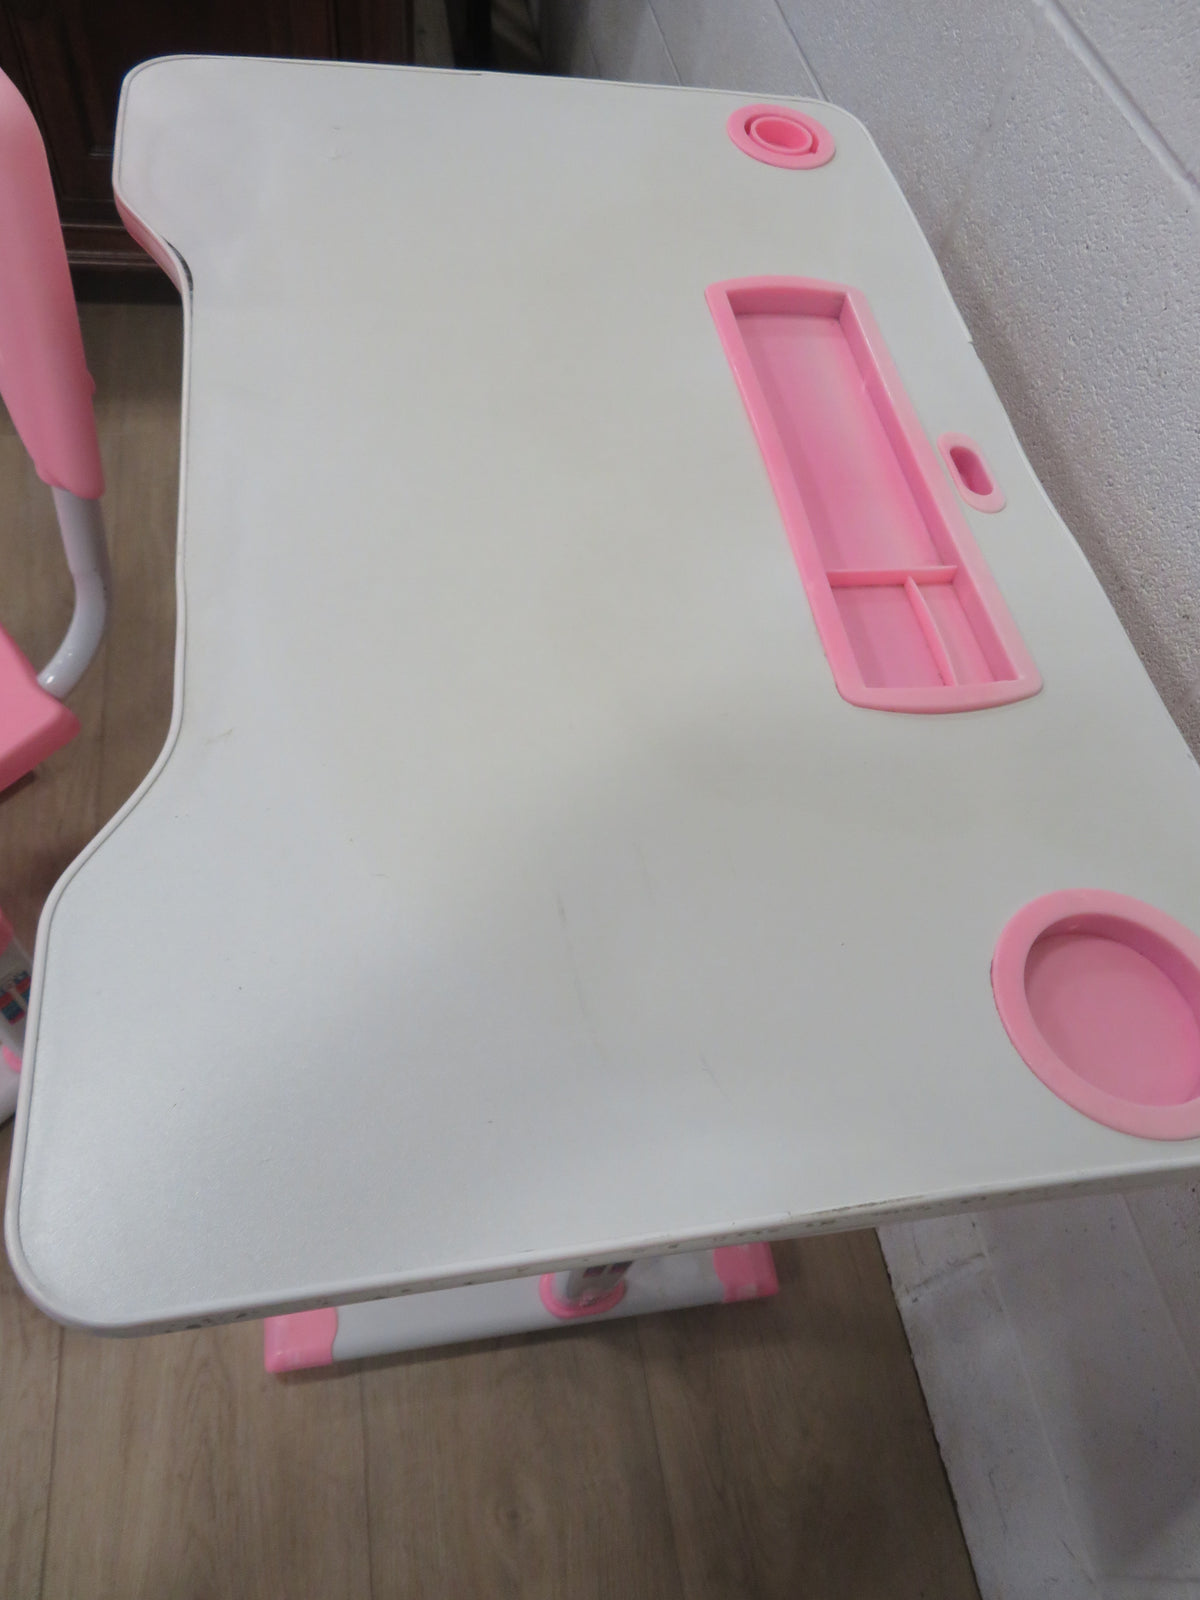 Small Childrens Desk and Chair Set in Pink